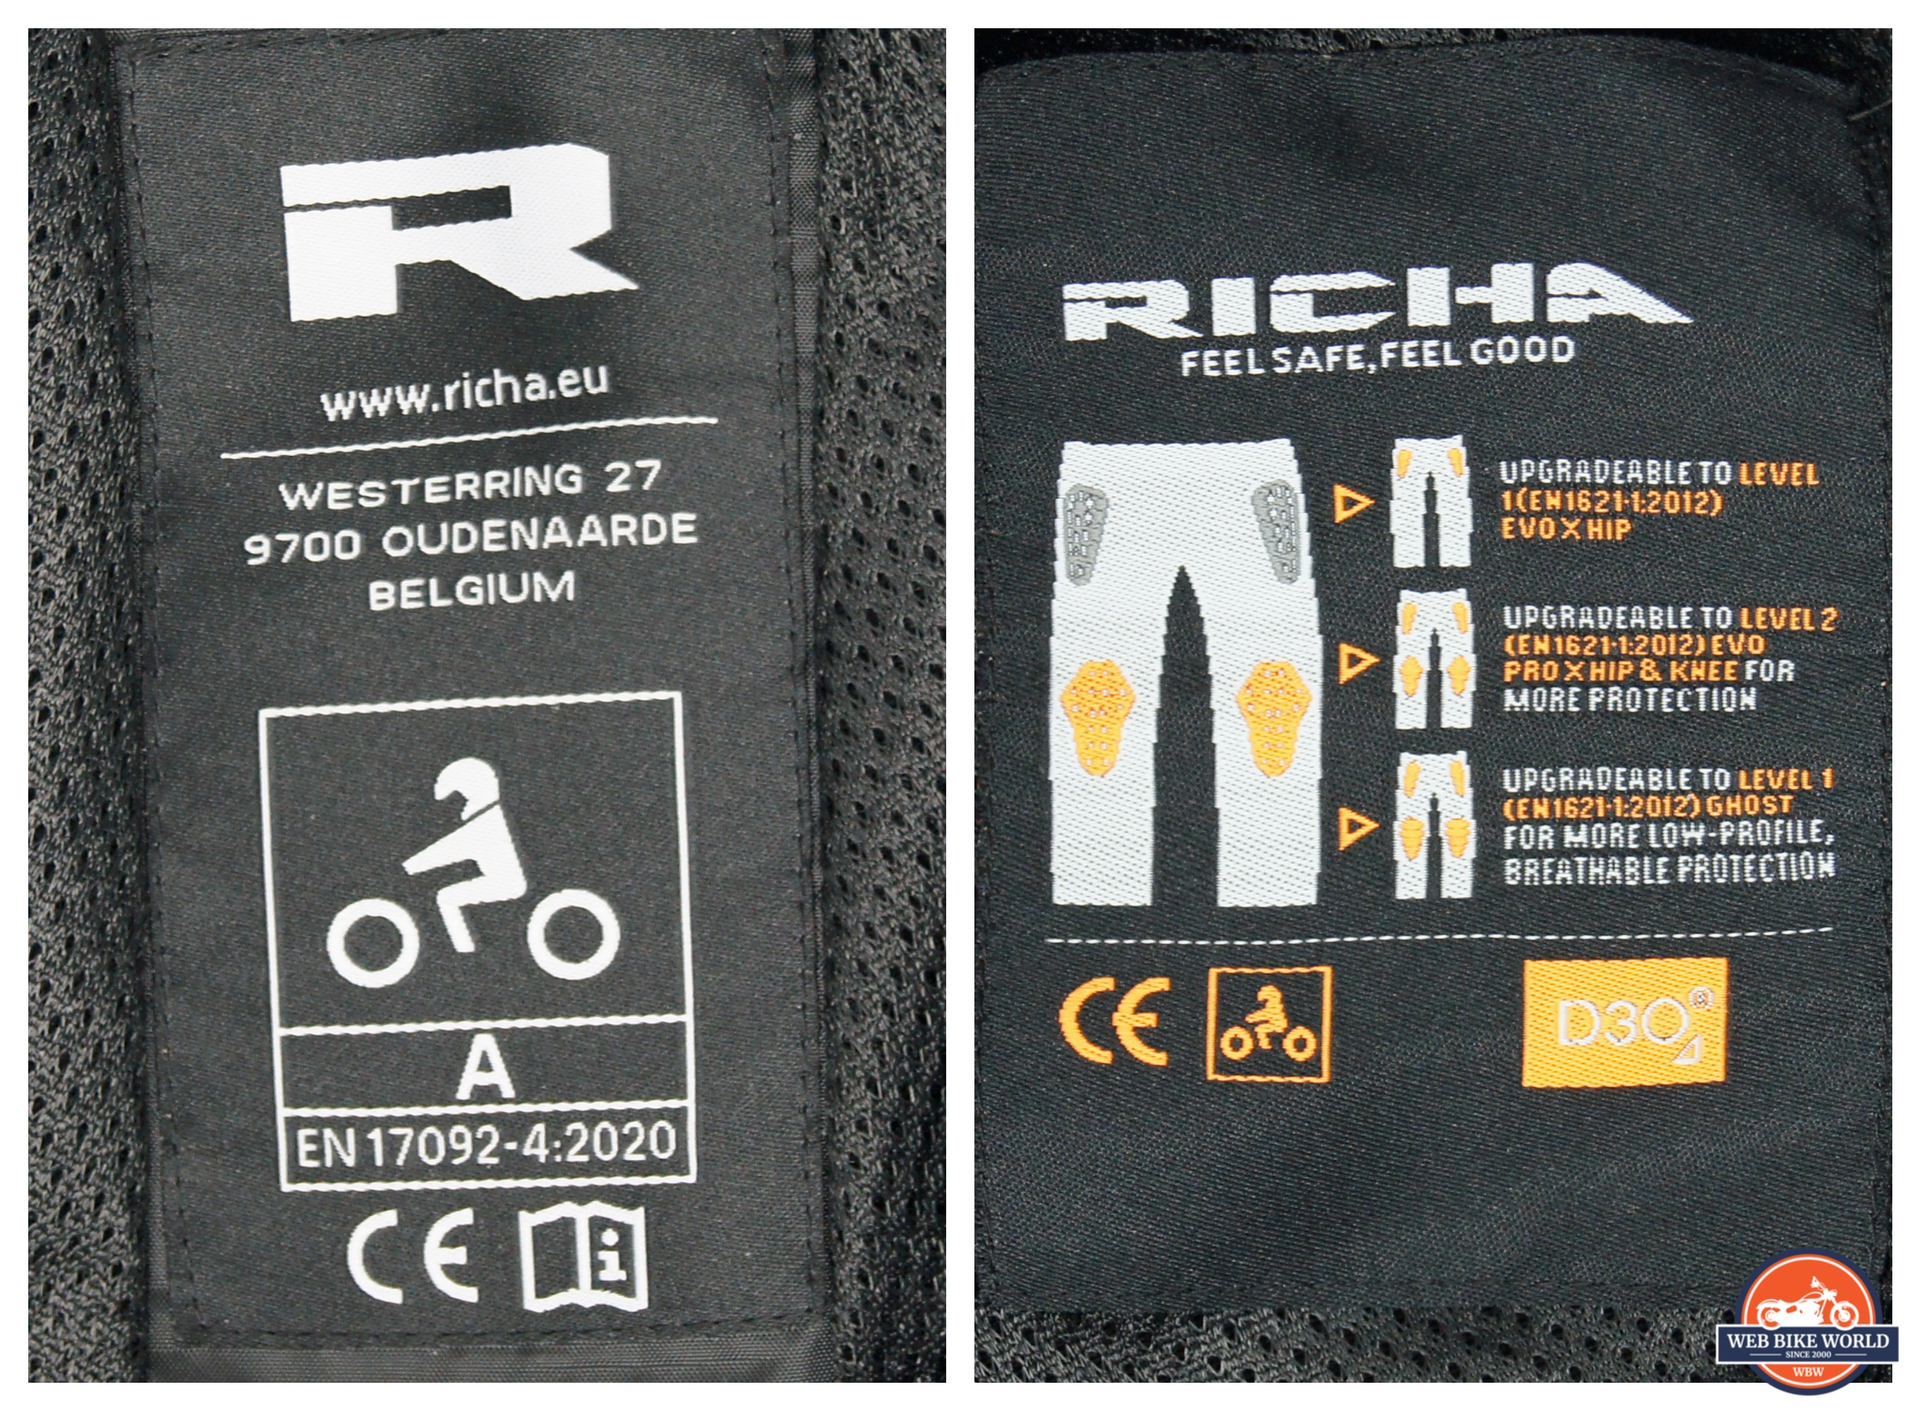 Tag explaining armor placement in Richa Brutus GTX Pants